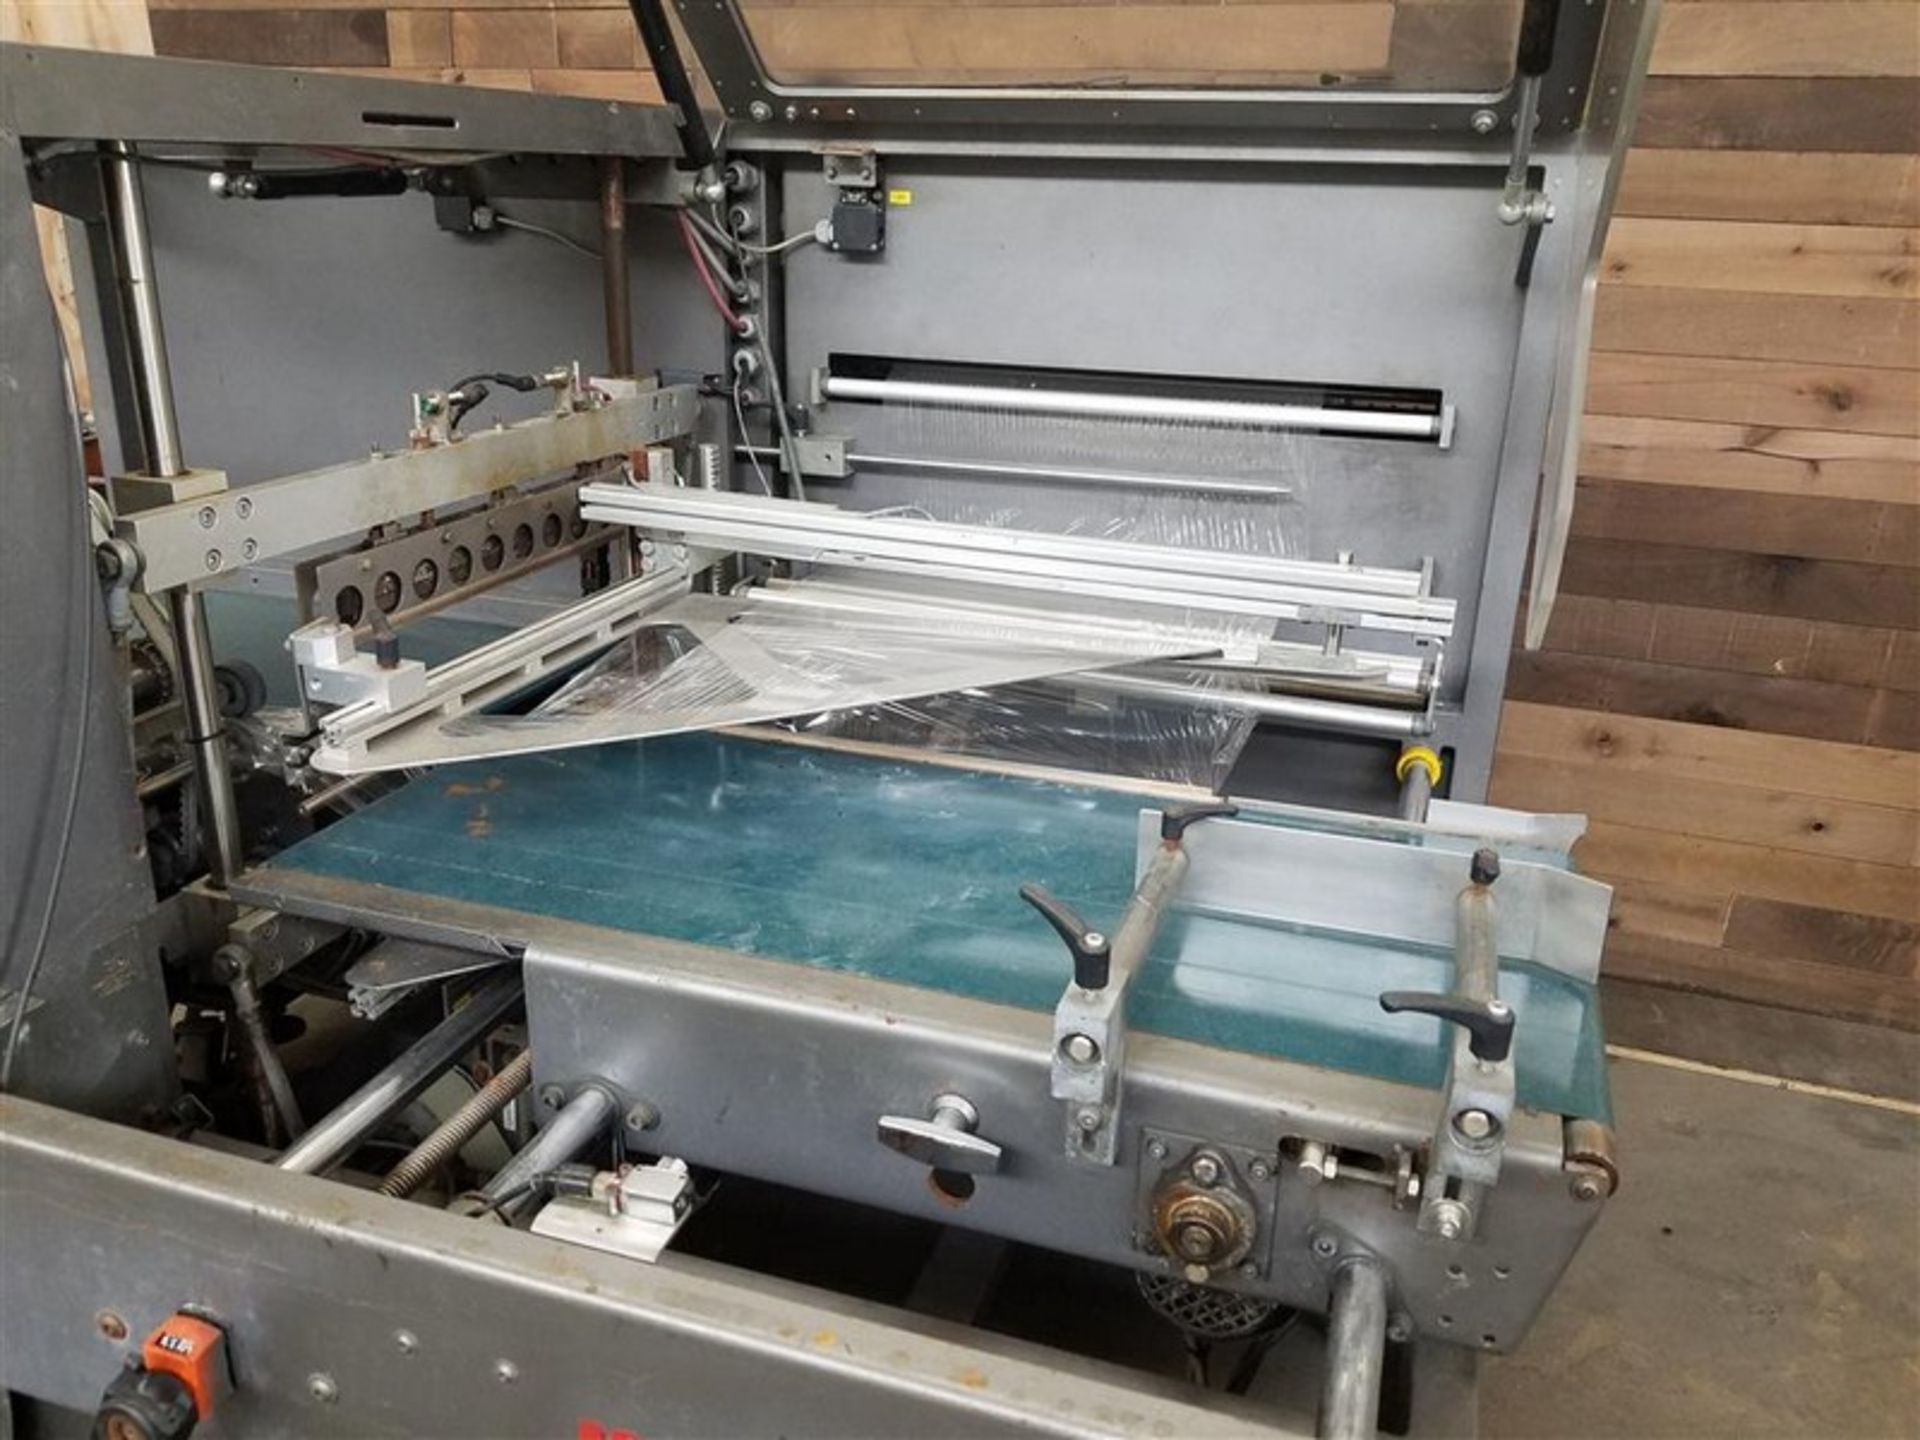 Kallfass Universal 400NT Automatic Side Sealer Shrink Wrapper, S/N N/A - ID Plate Unreadable, 480 V, - Image 2 of 9